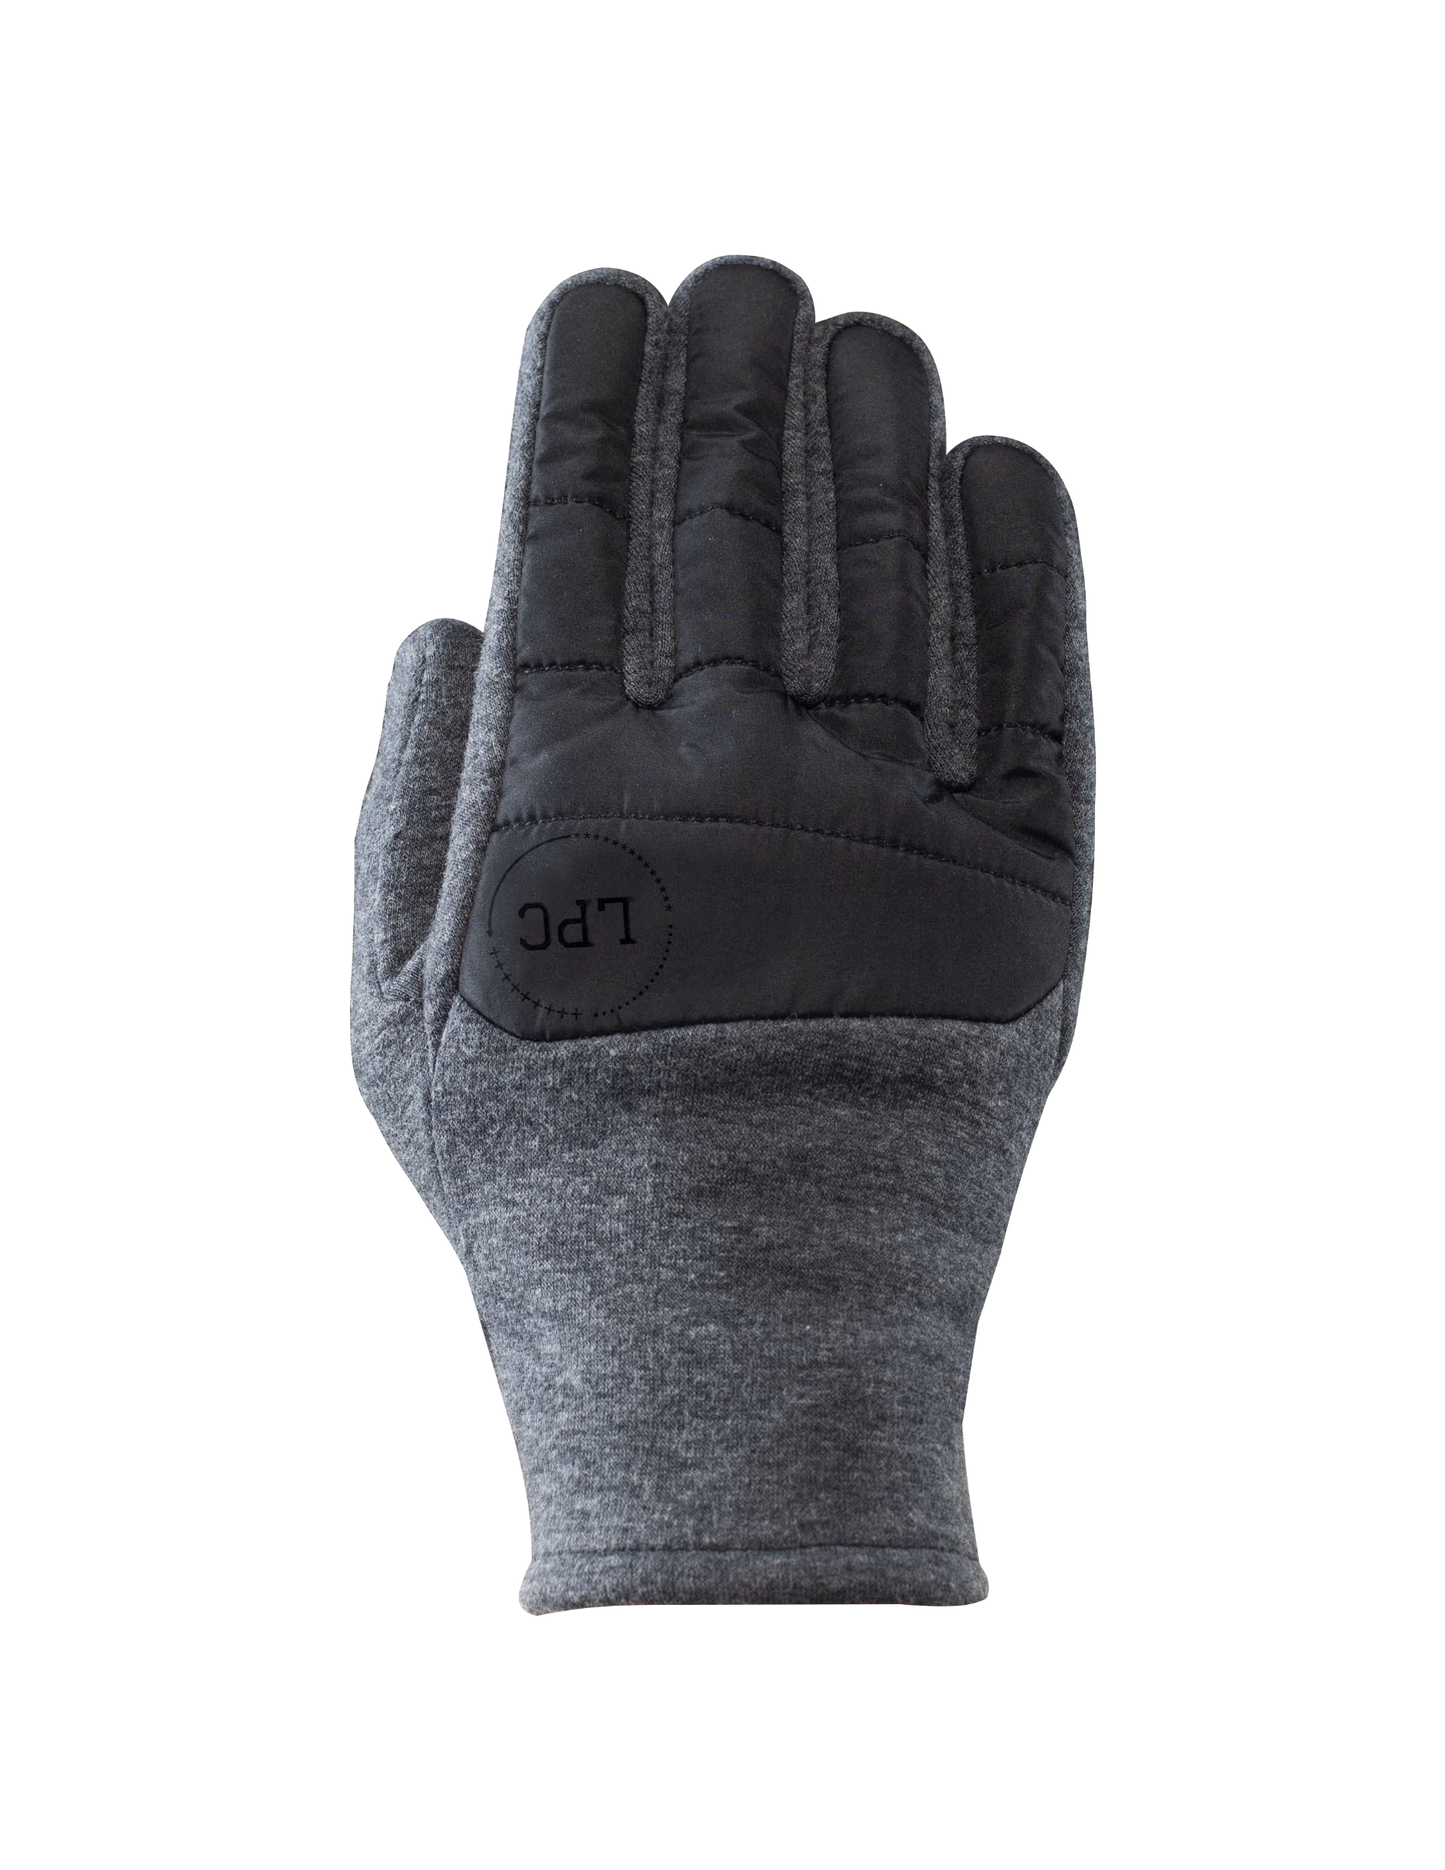 LIGHT INSULATED GLOVE * Willow